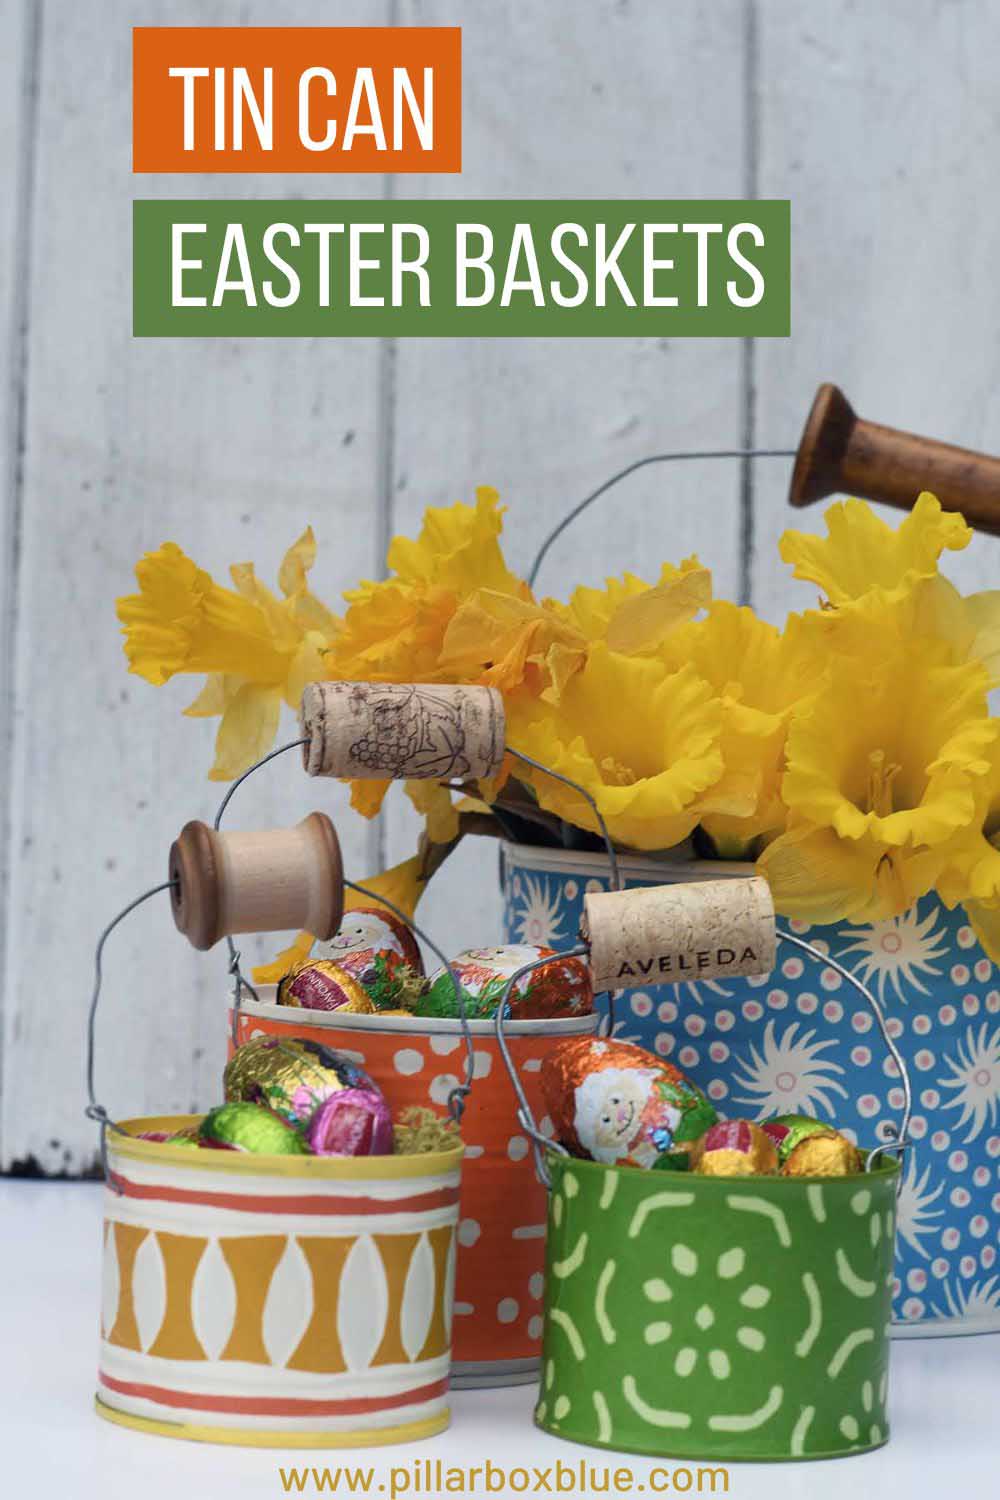 Tin can Easter baskets upcycled